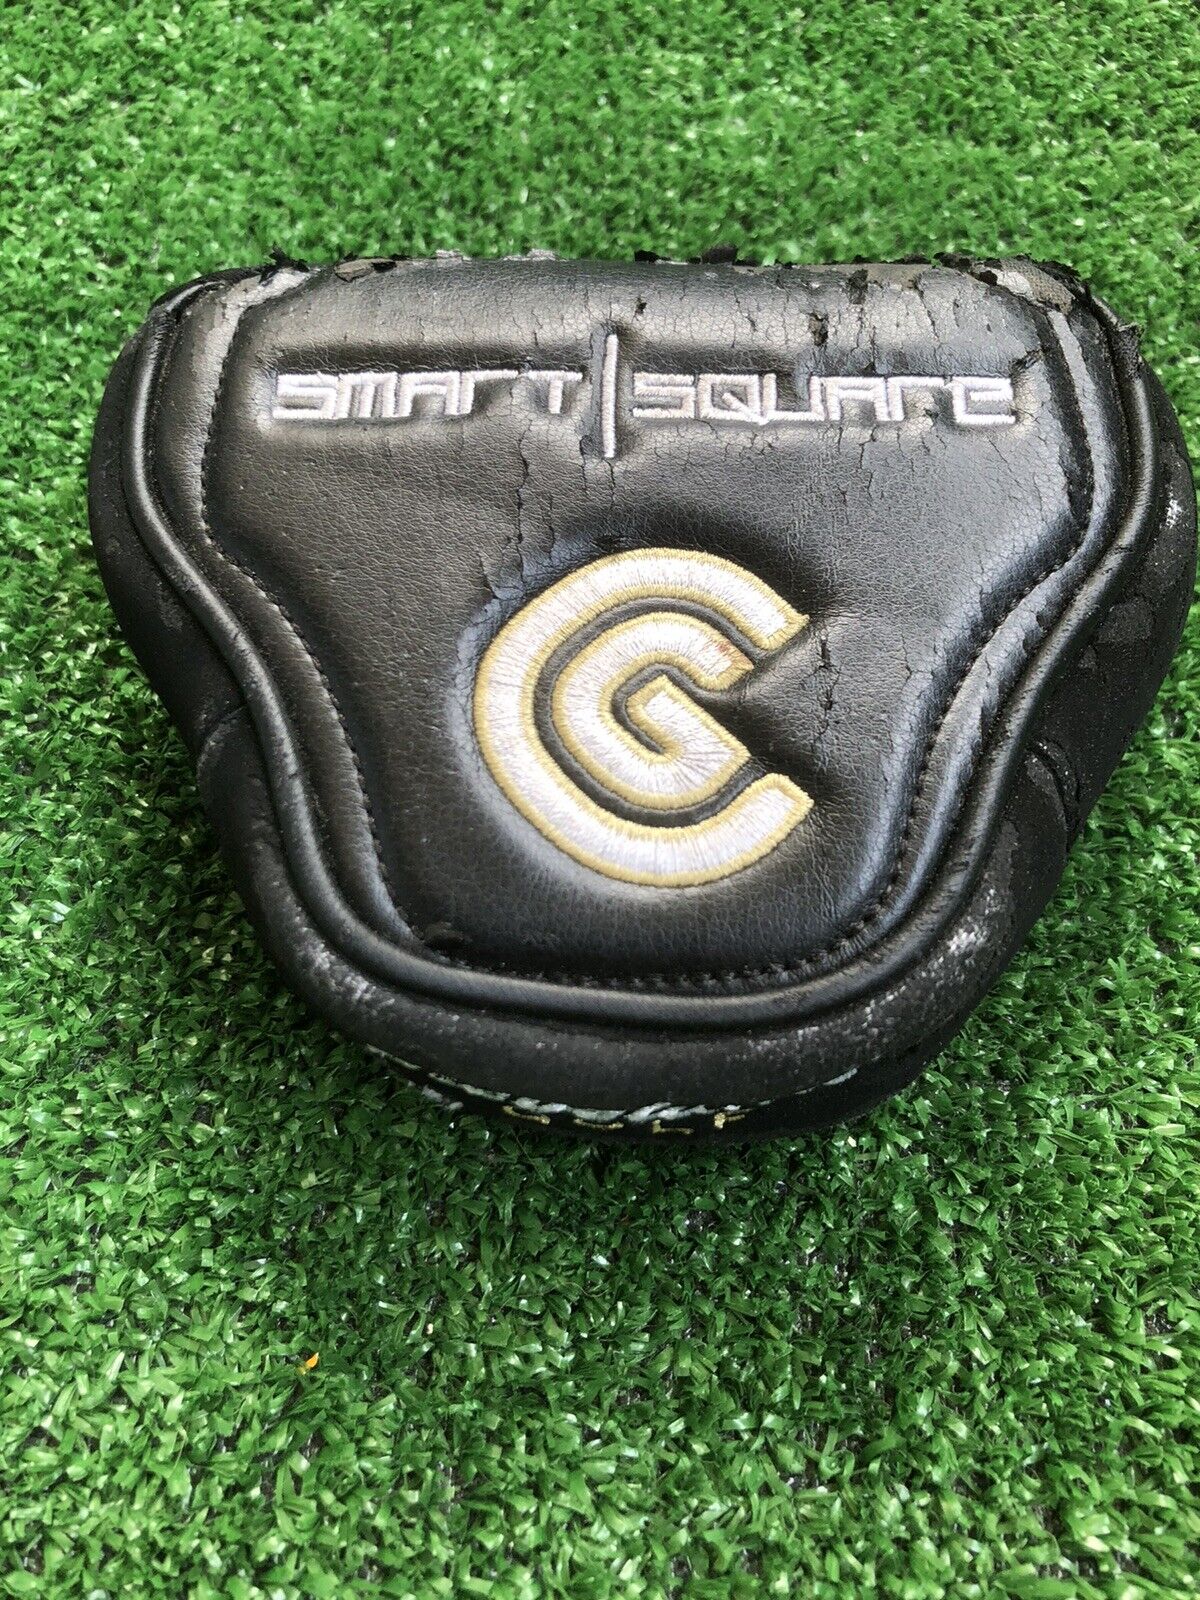 Cleveland Smart Square Putter Golf Club Headcover - FAIR Condition